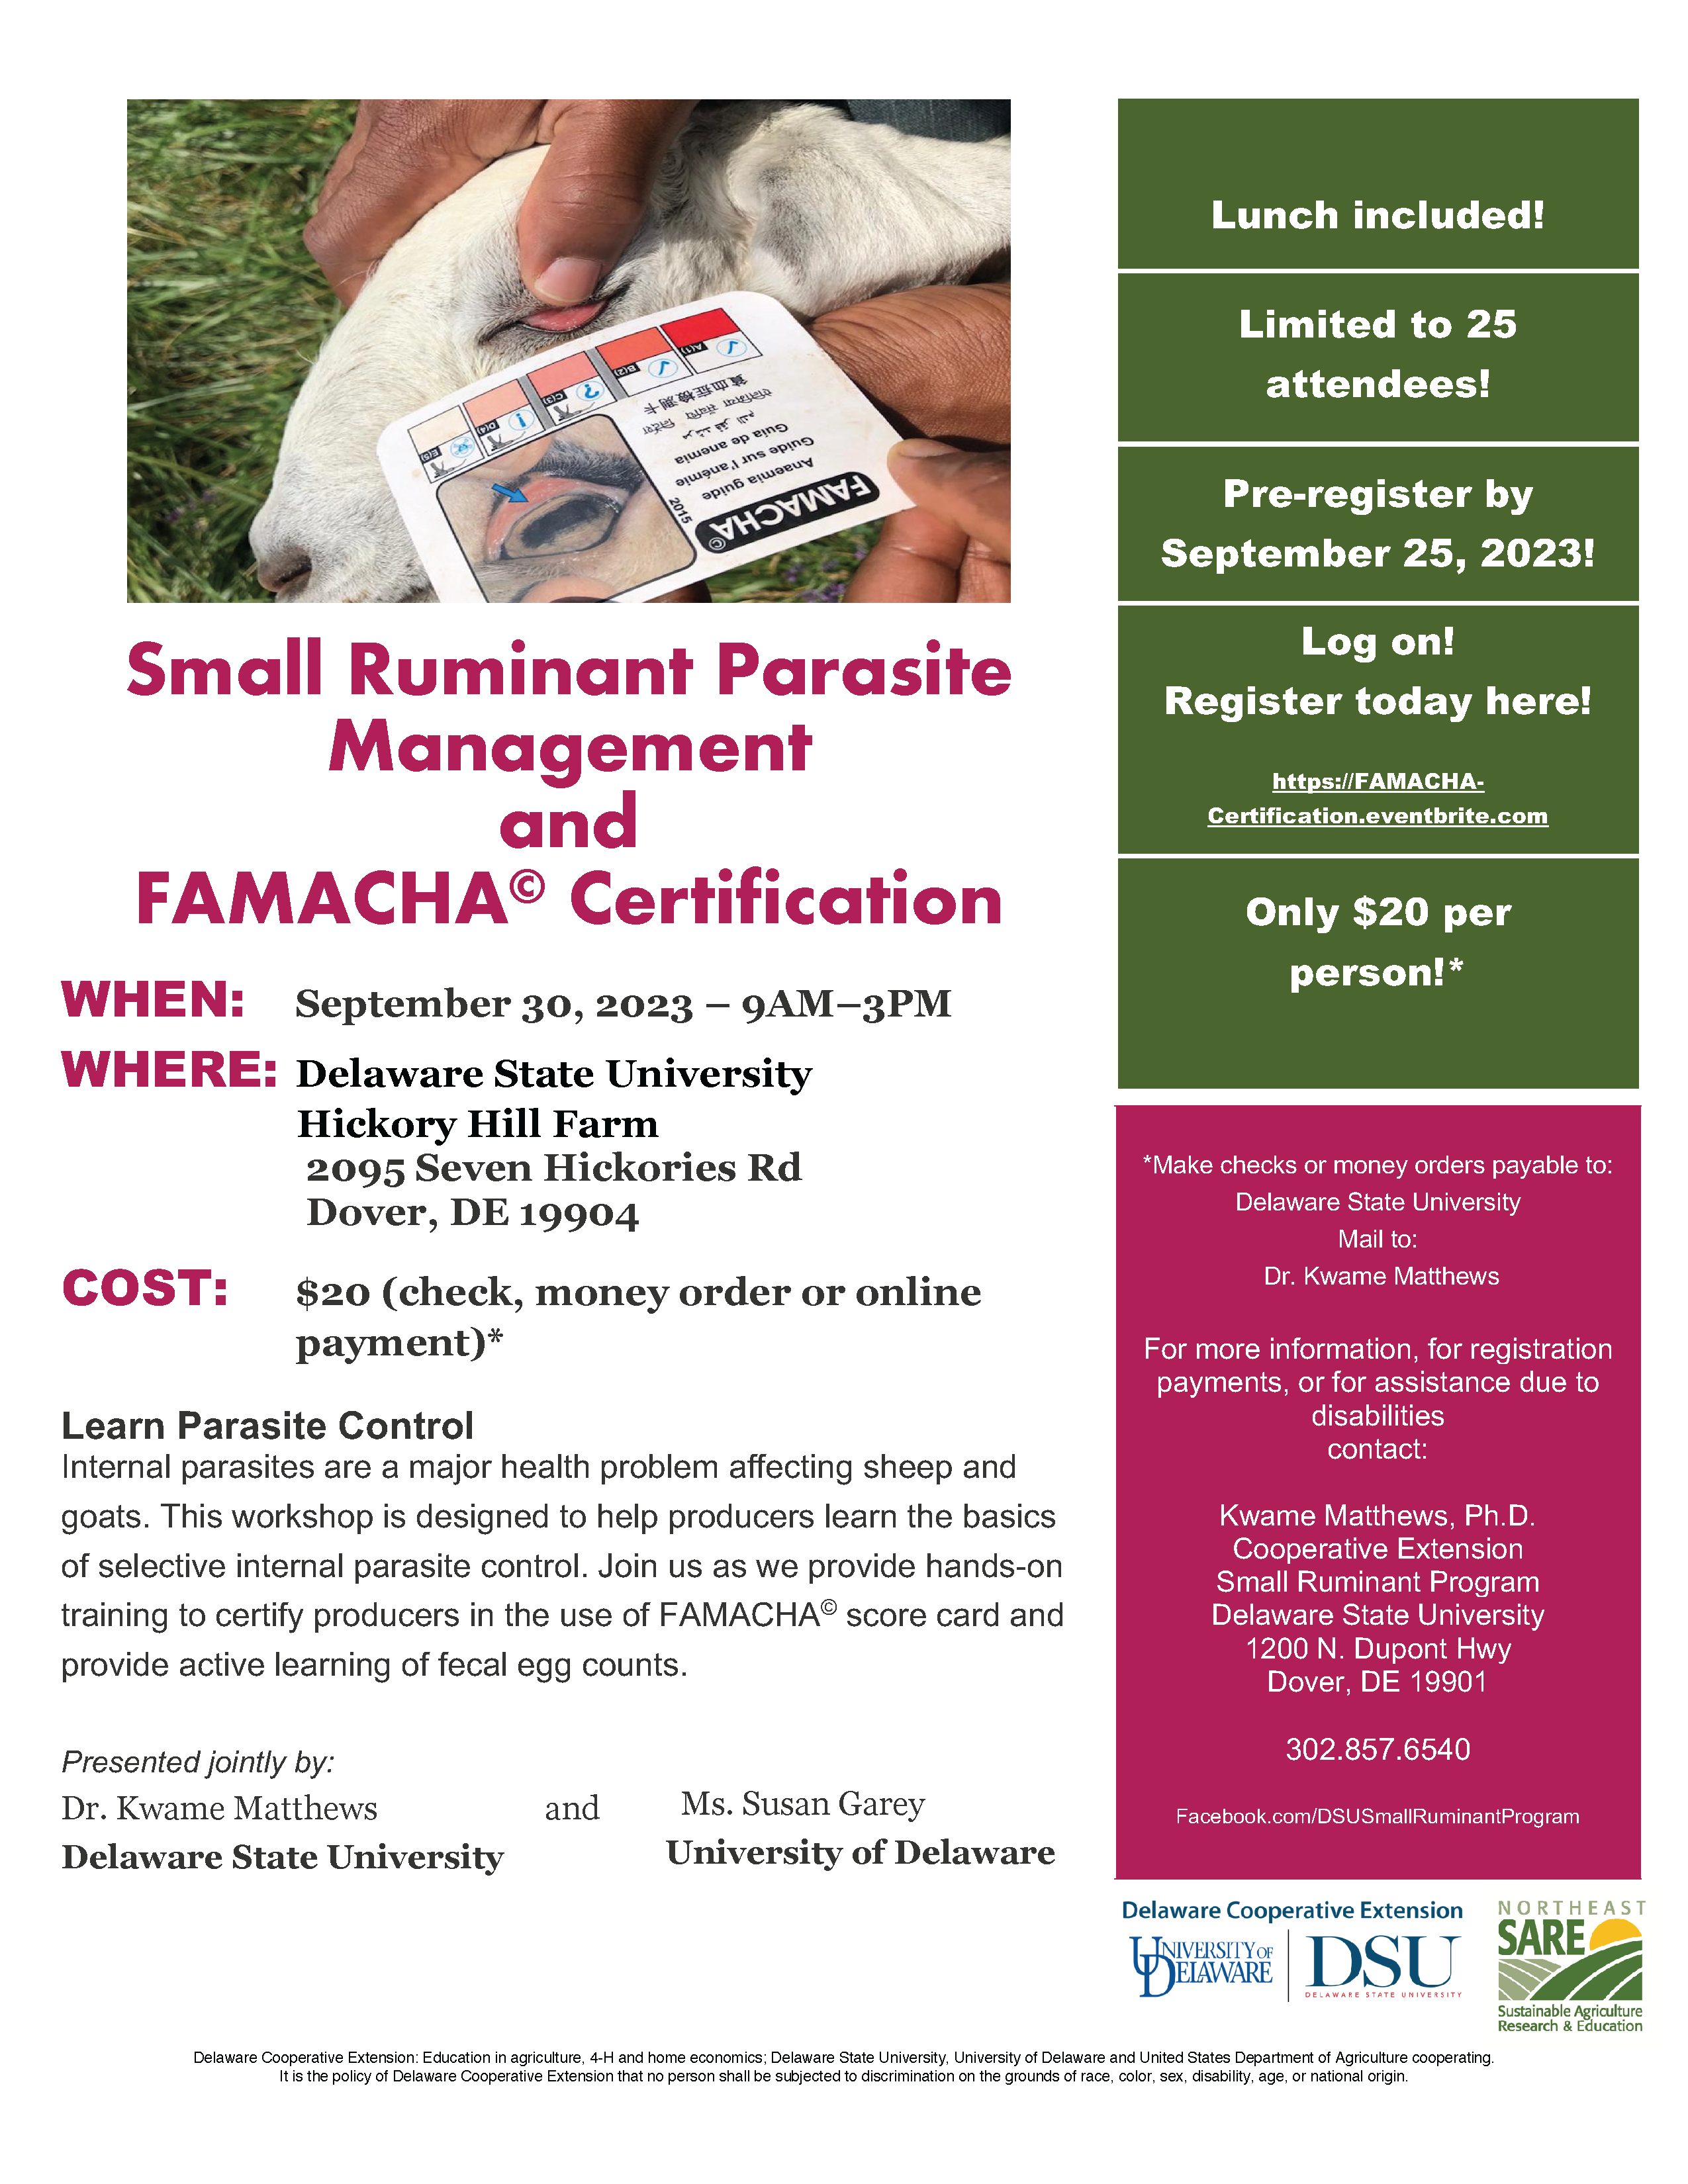 Small ruminant producers are invited to attend this workshop to learn more about animal health and parasite control. 